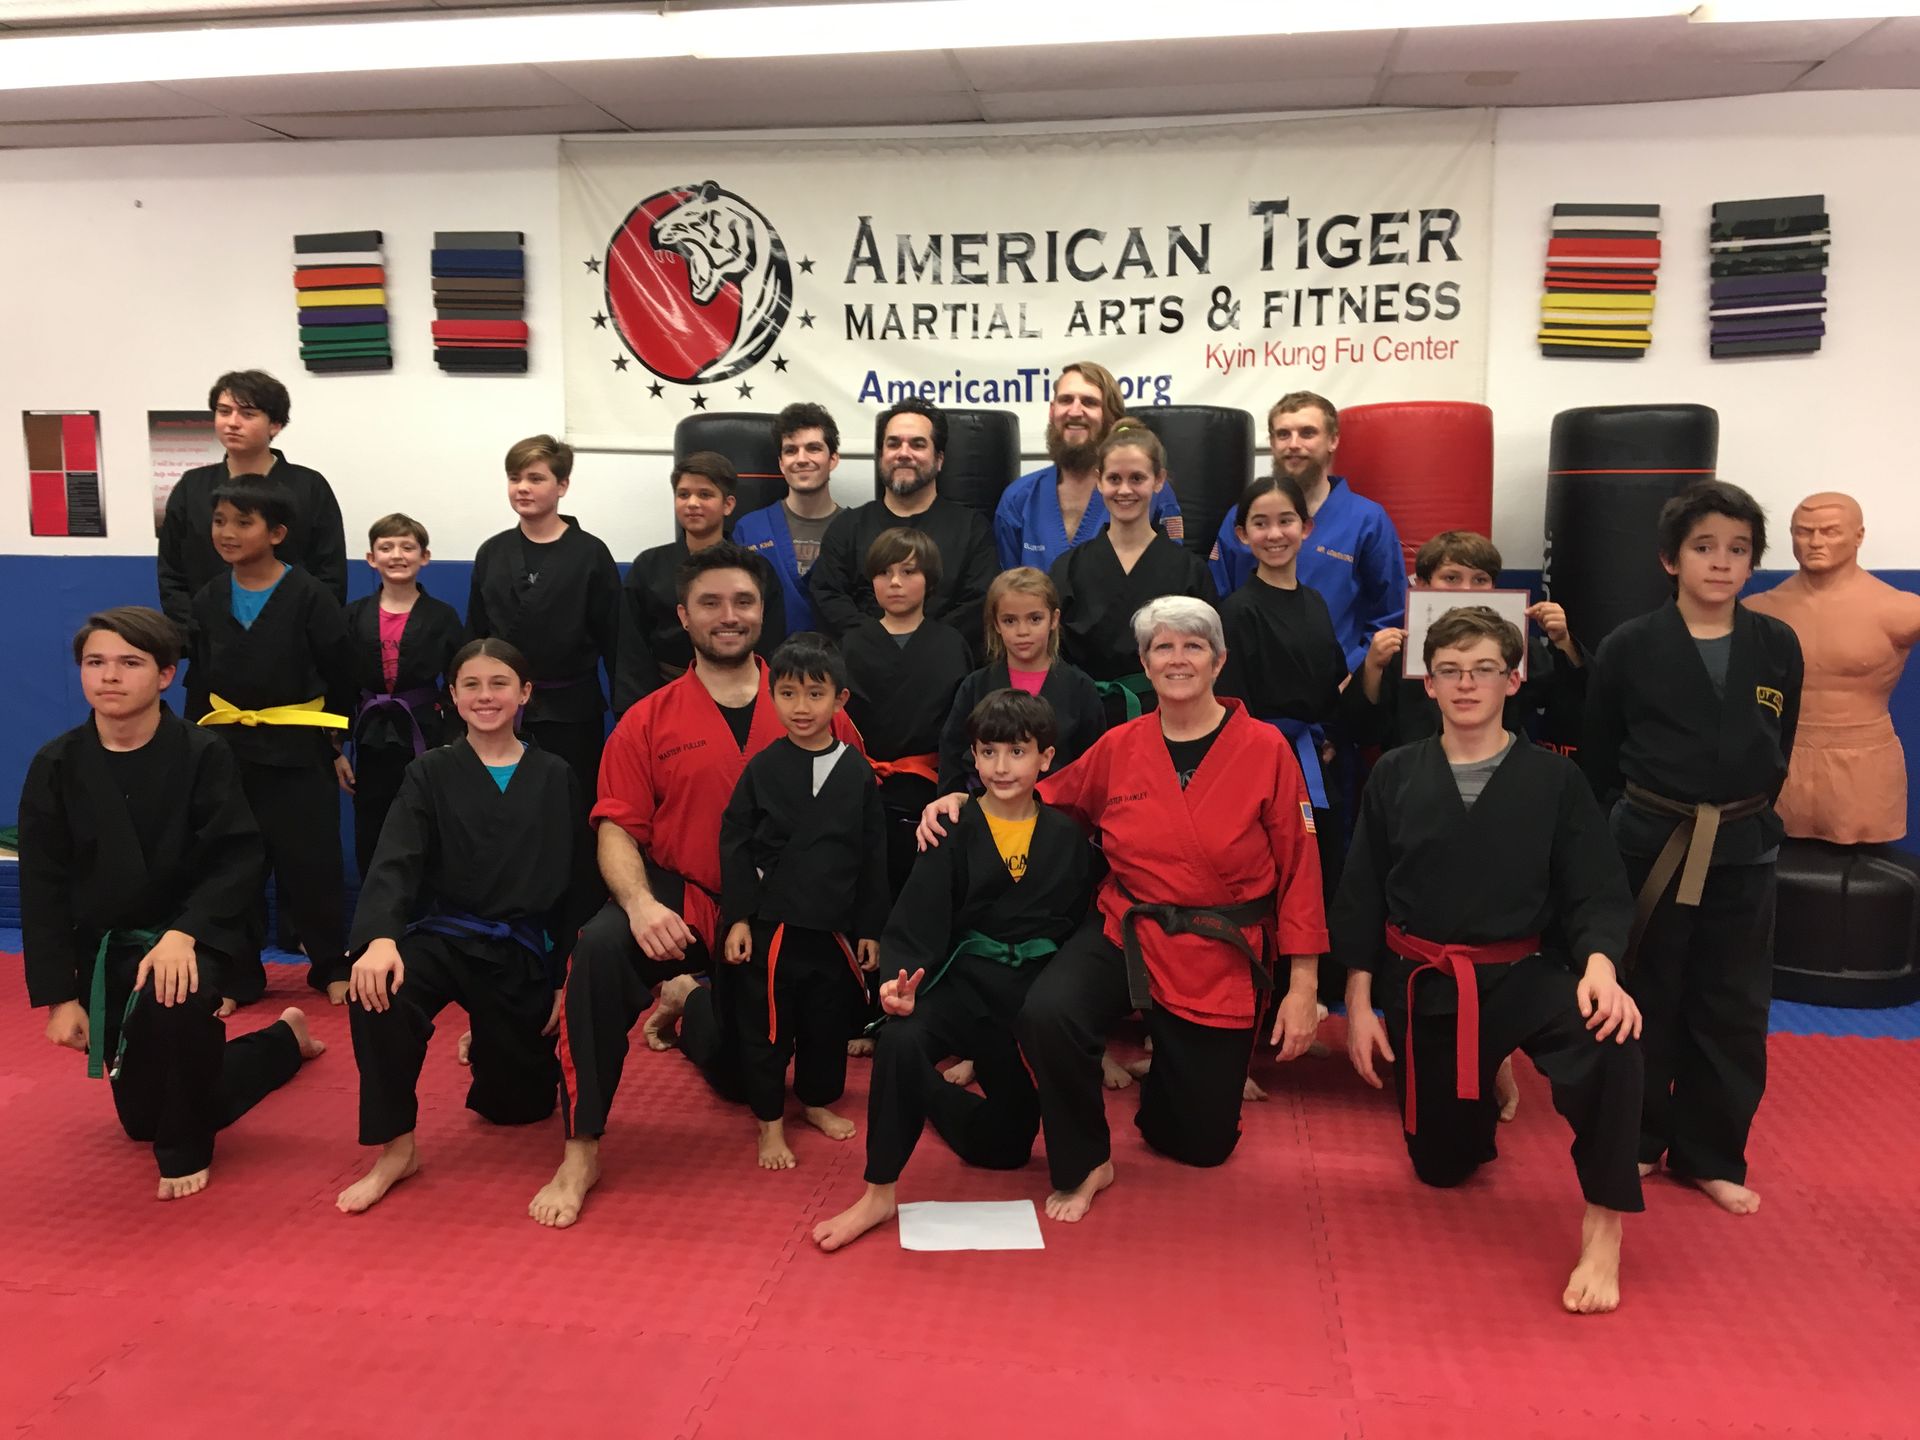 A group of people are posing for a picture in front of a sign that says american tiger martial arts & fitness.